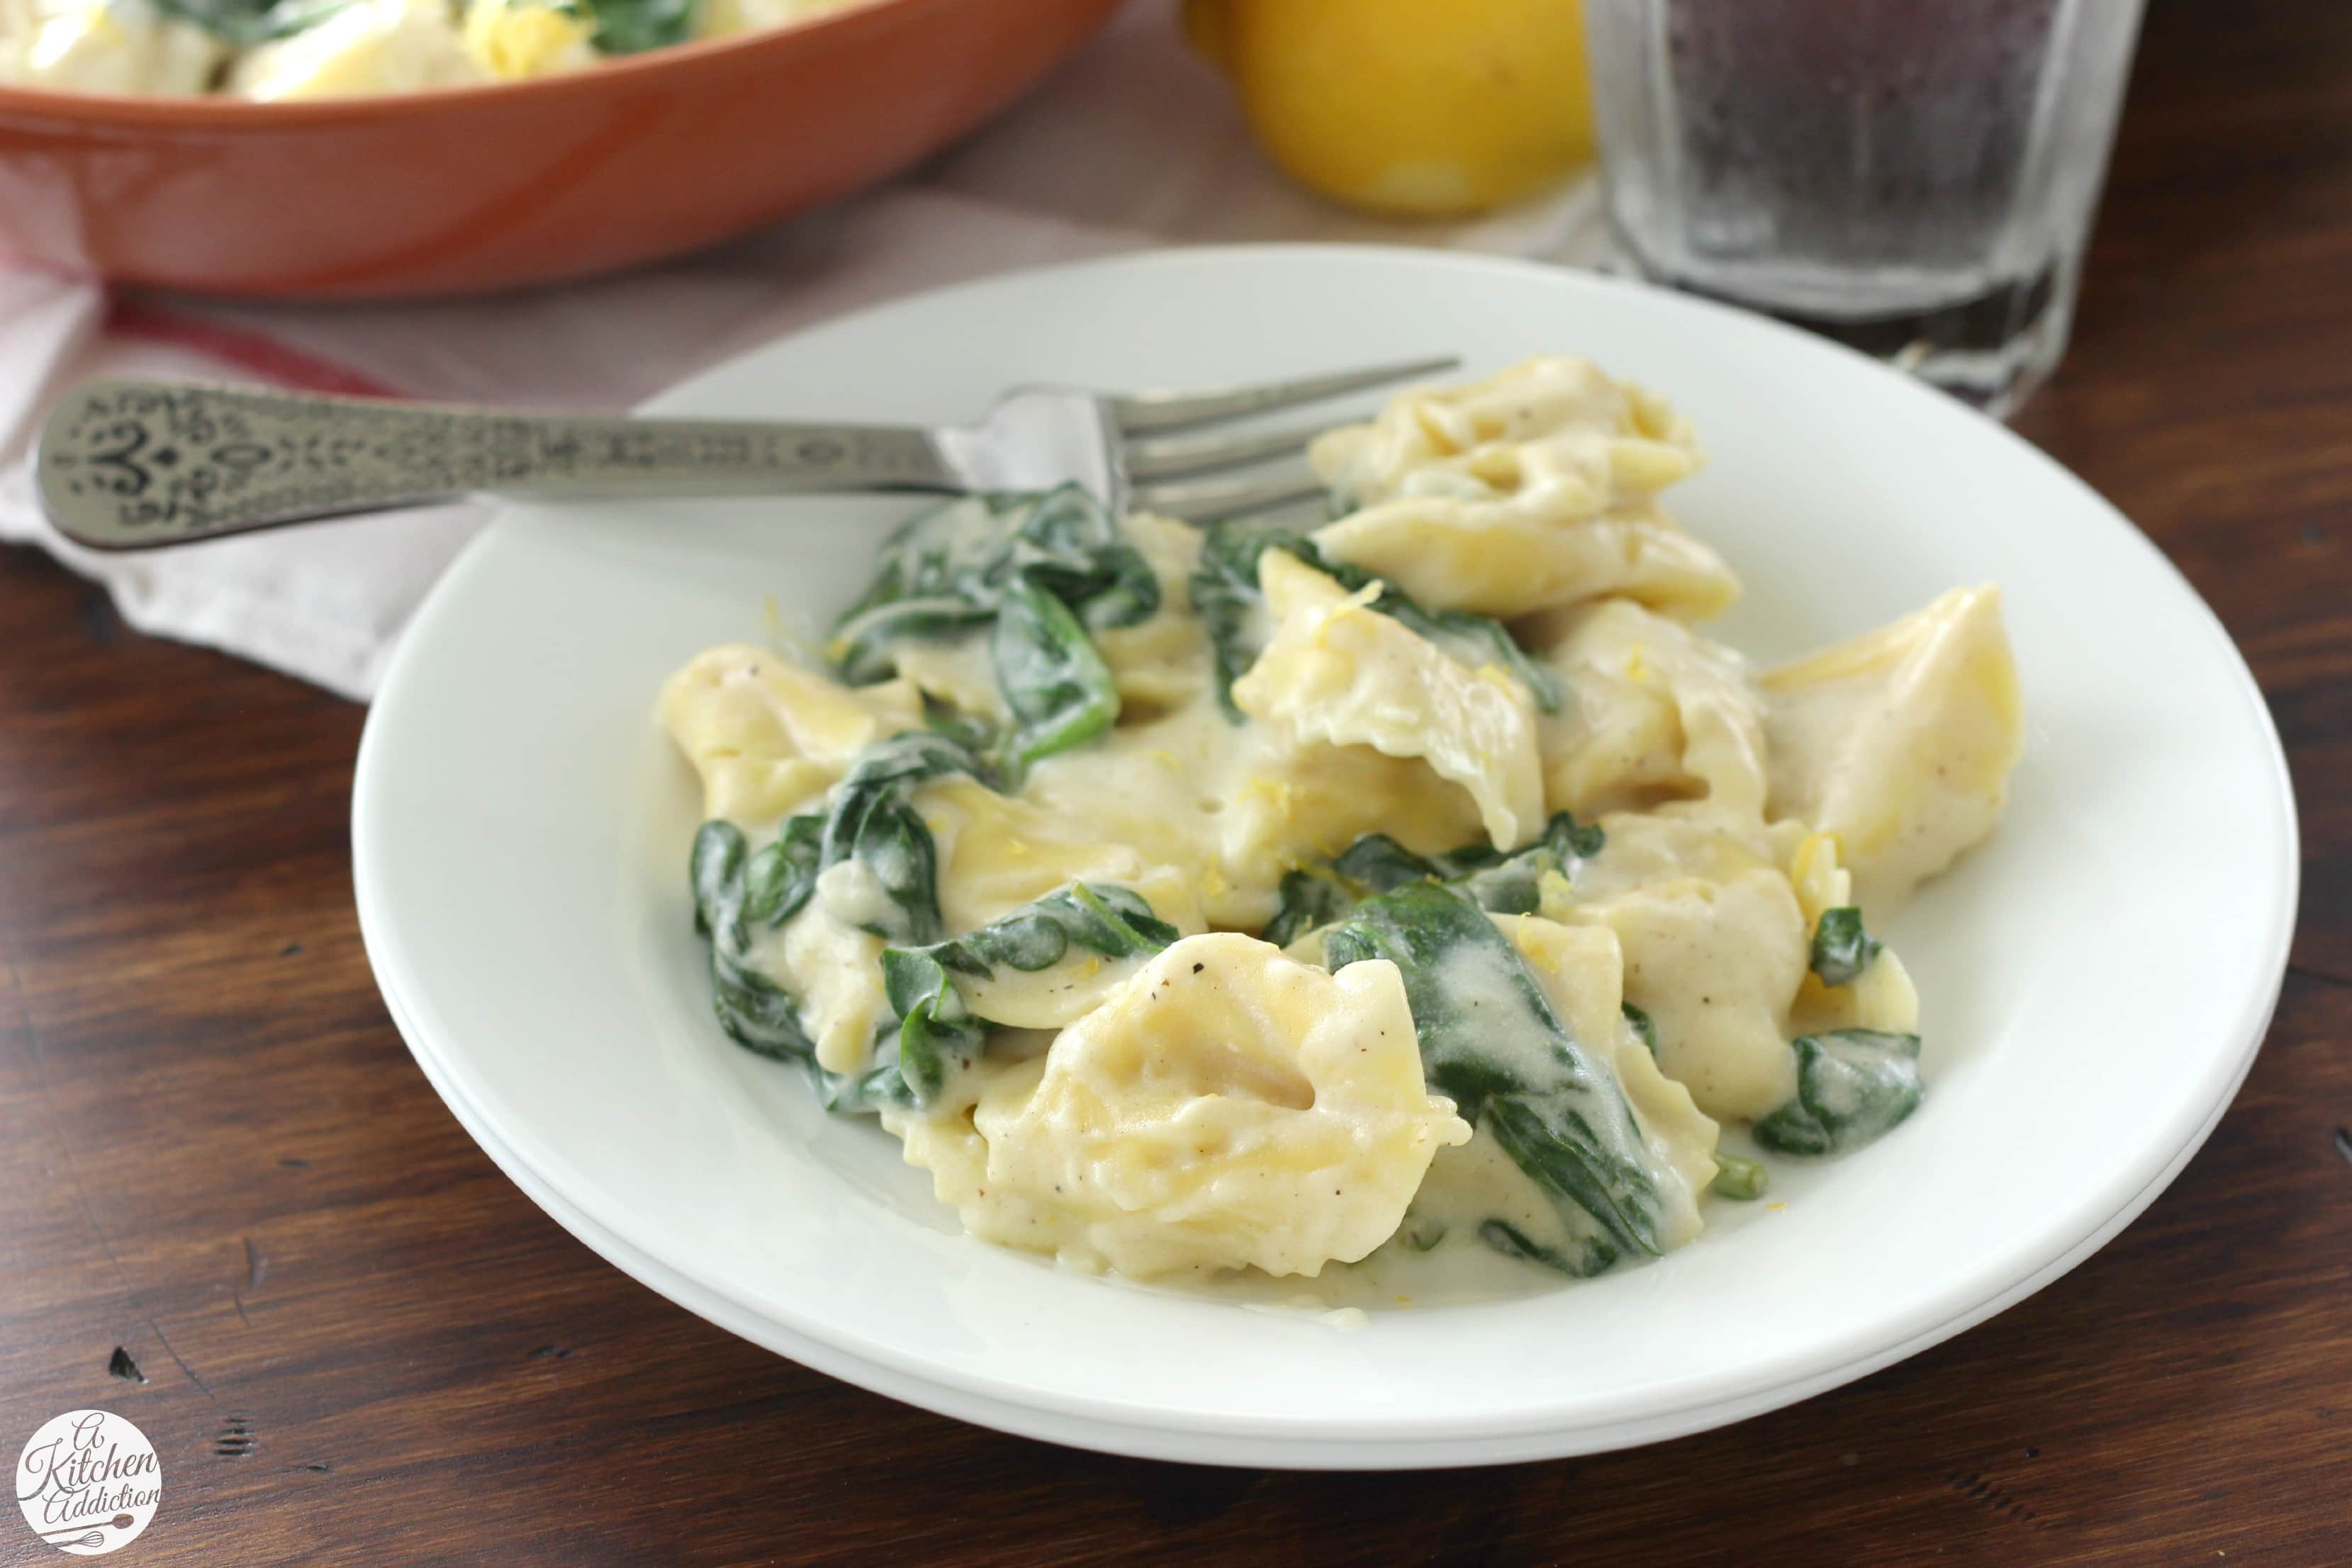 30 Minute Tortellini with Spinach and Lemon Cream Sauce from A Kitchen Addiction